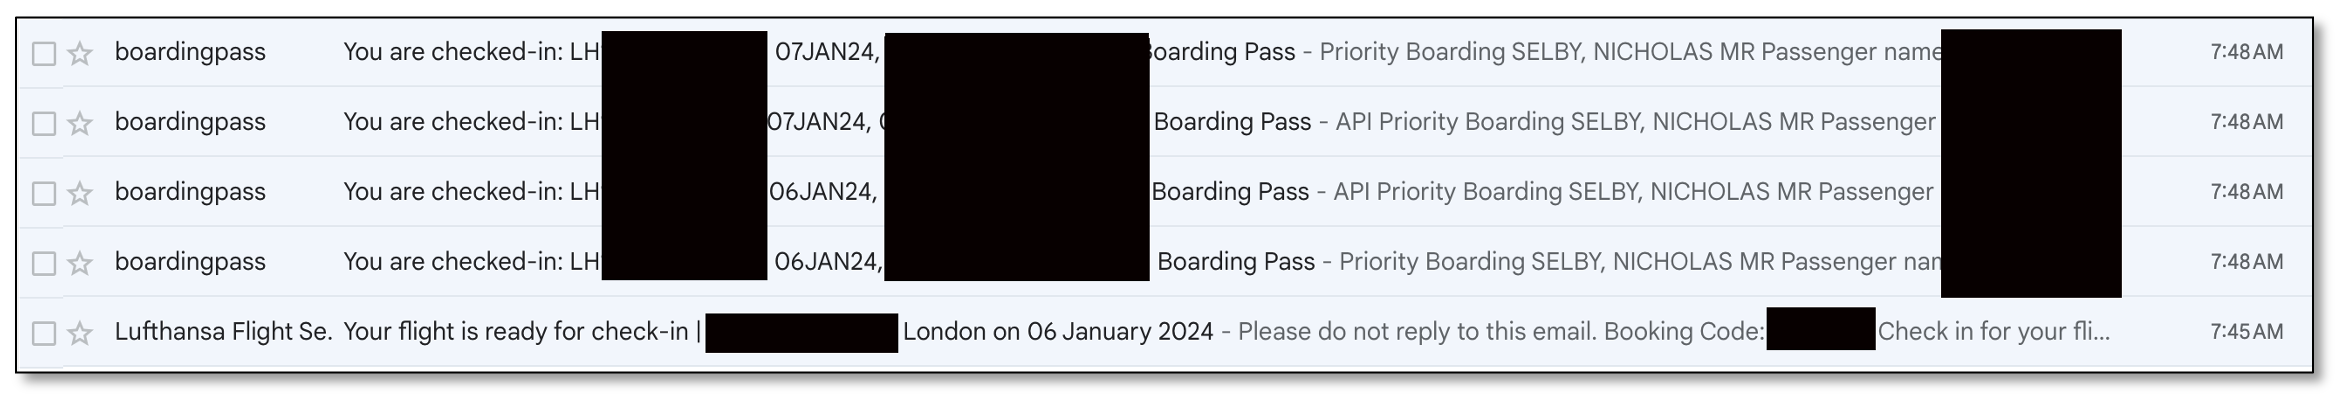 repeated boarding pass emails, one for each leg of a flight.